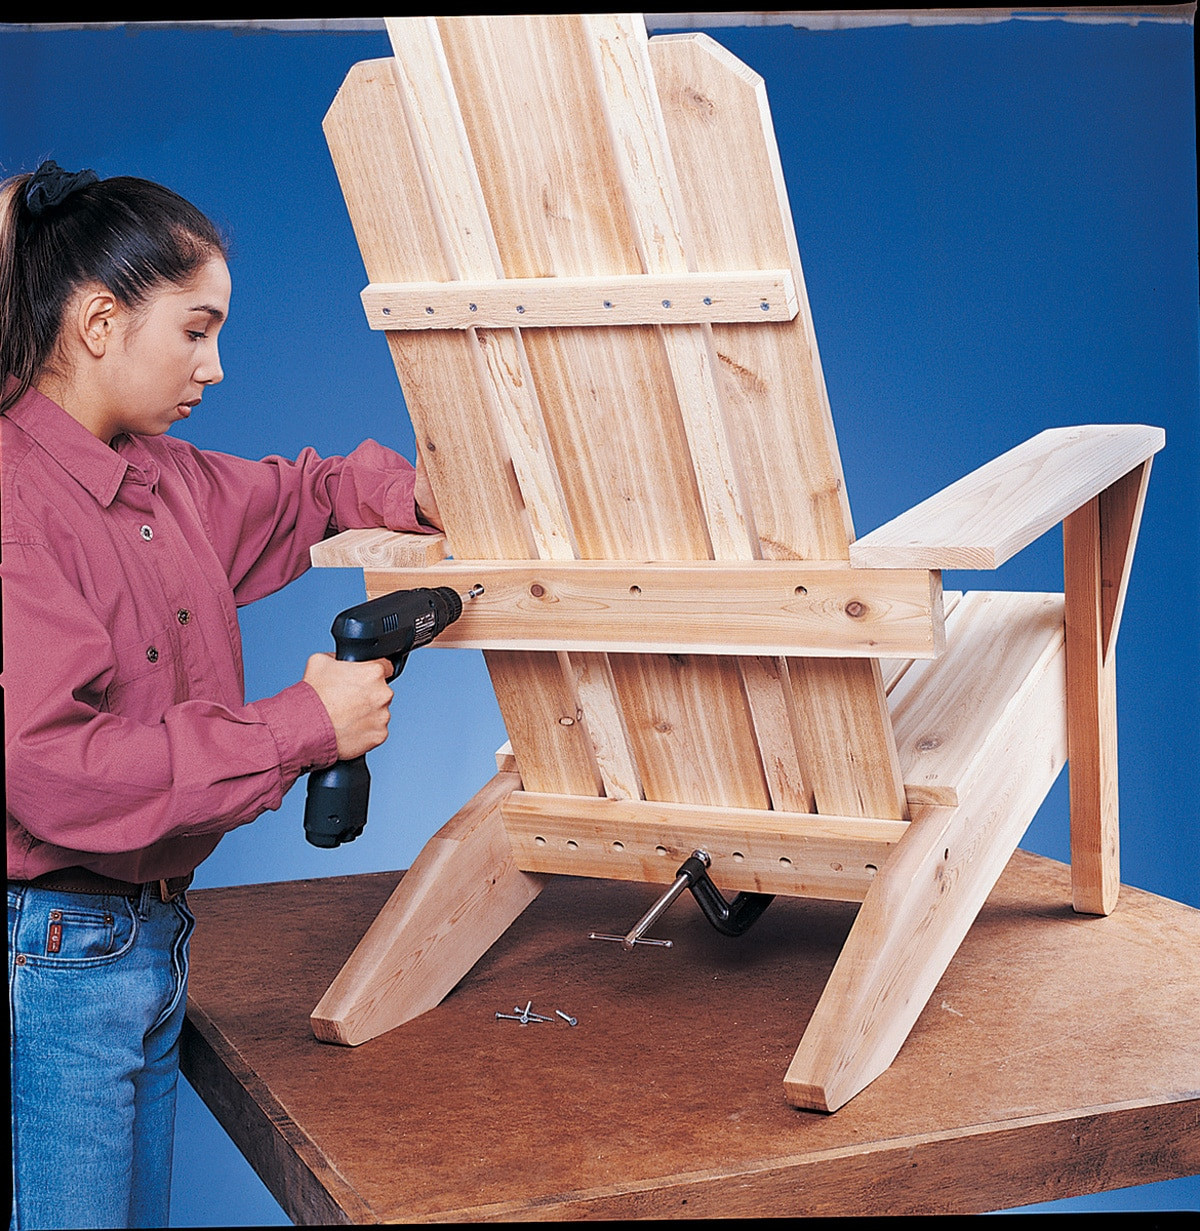 The 23 Best Ideas for Diy Adirondack Chair Kit - Home, Family, Style 